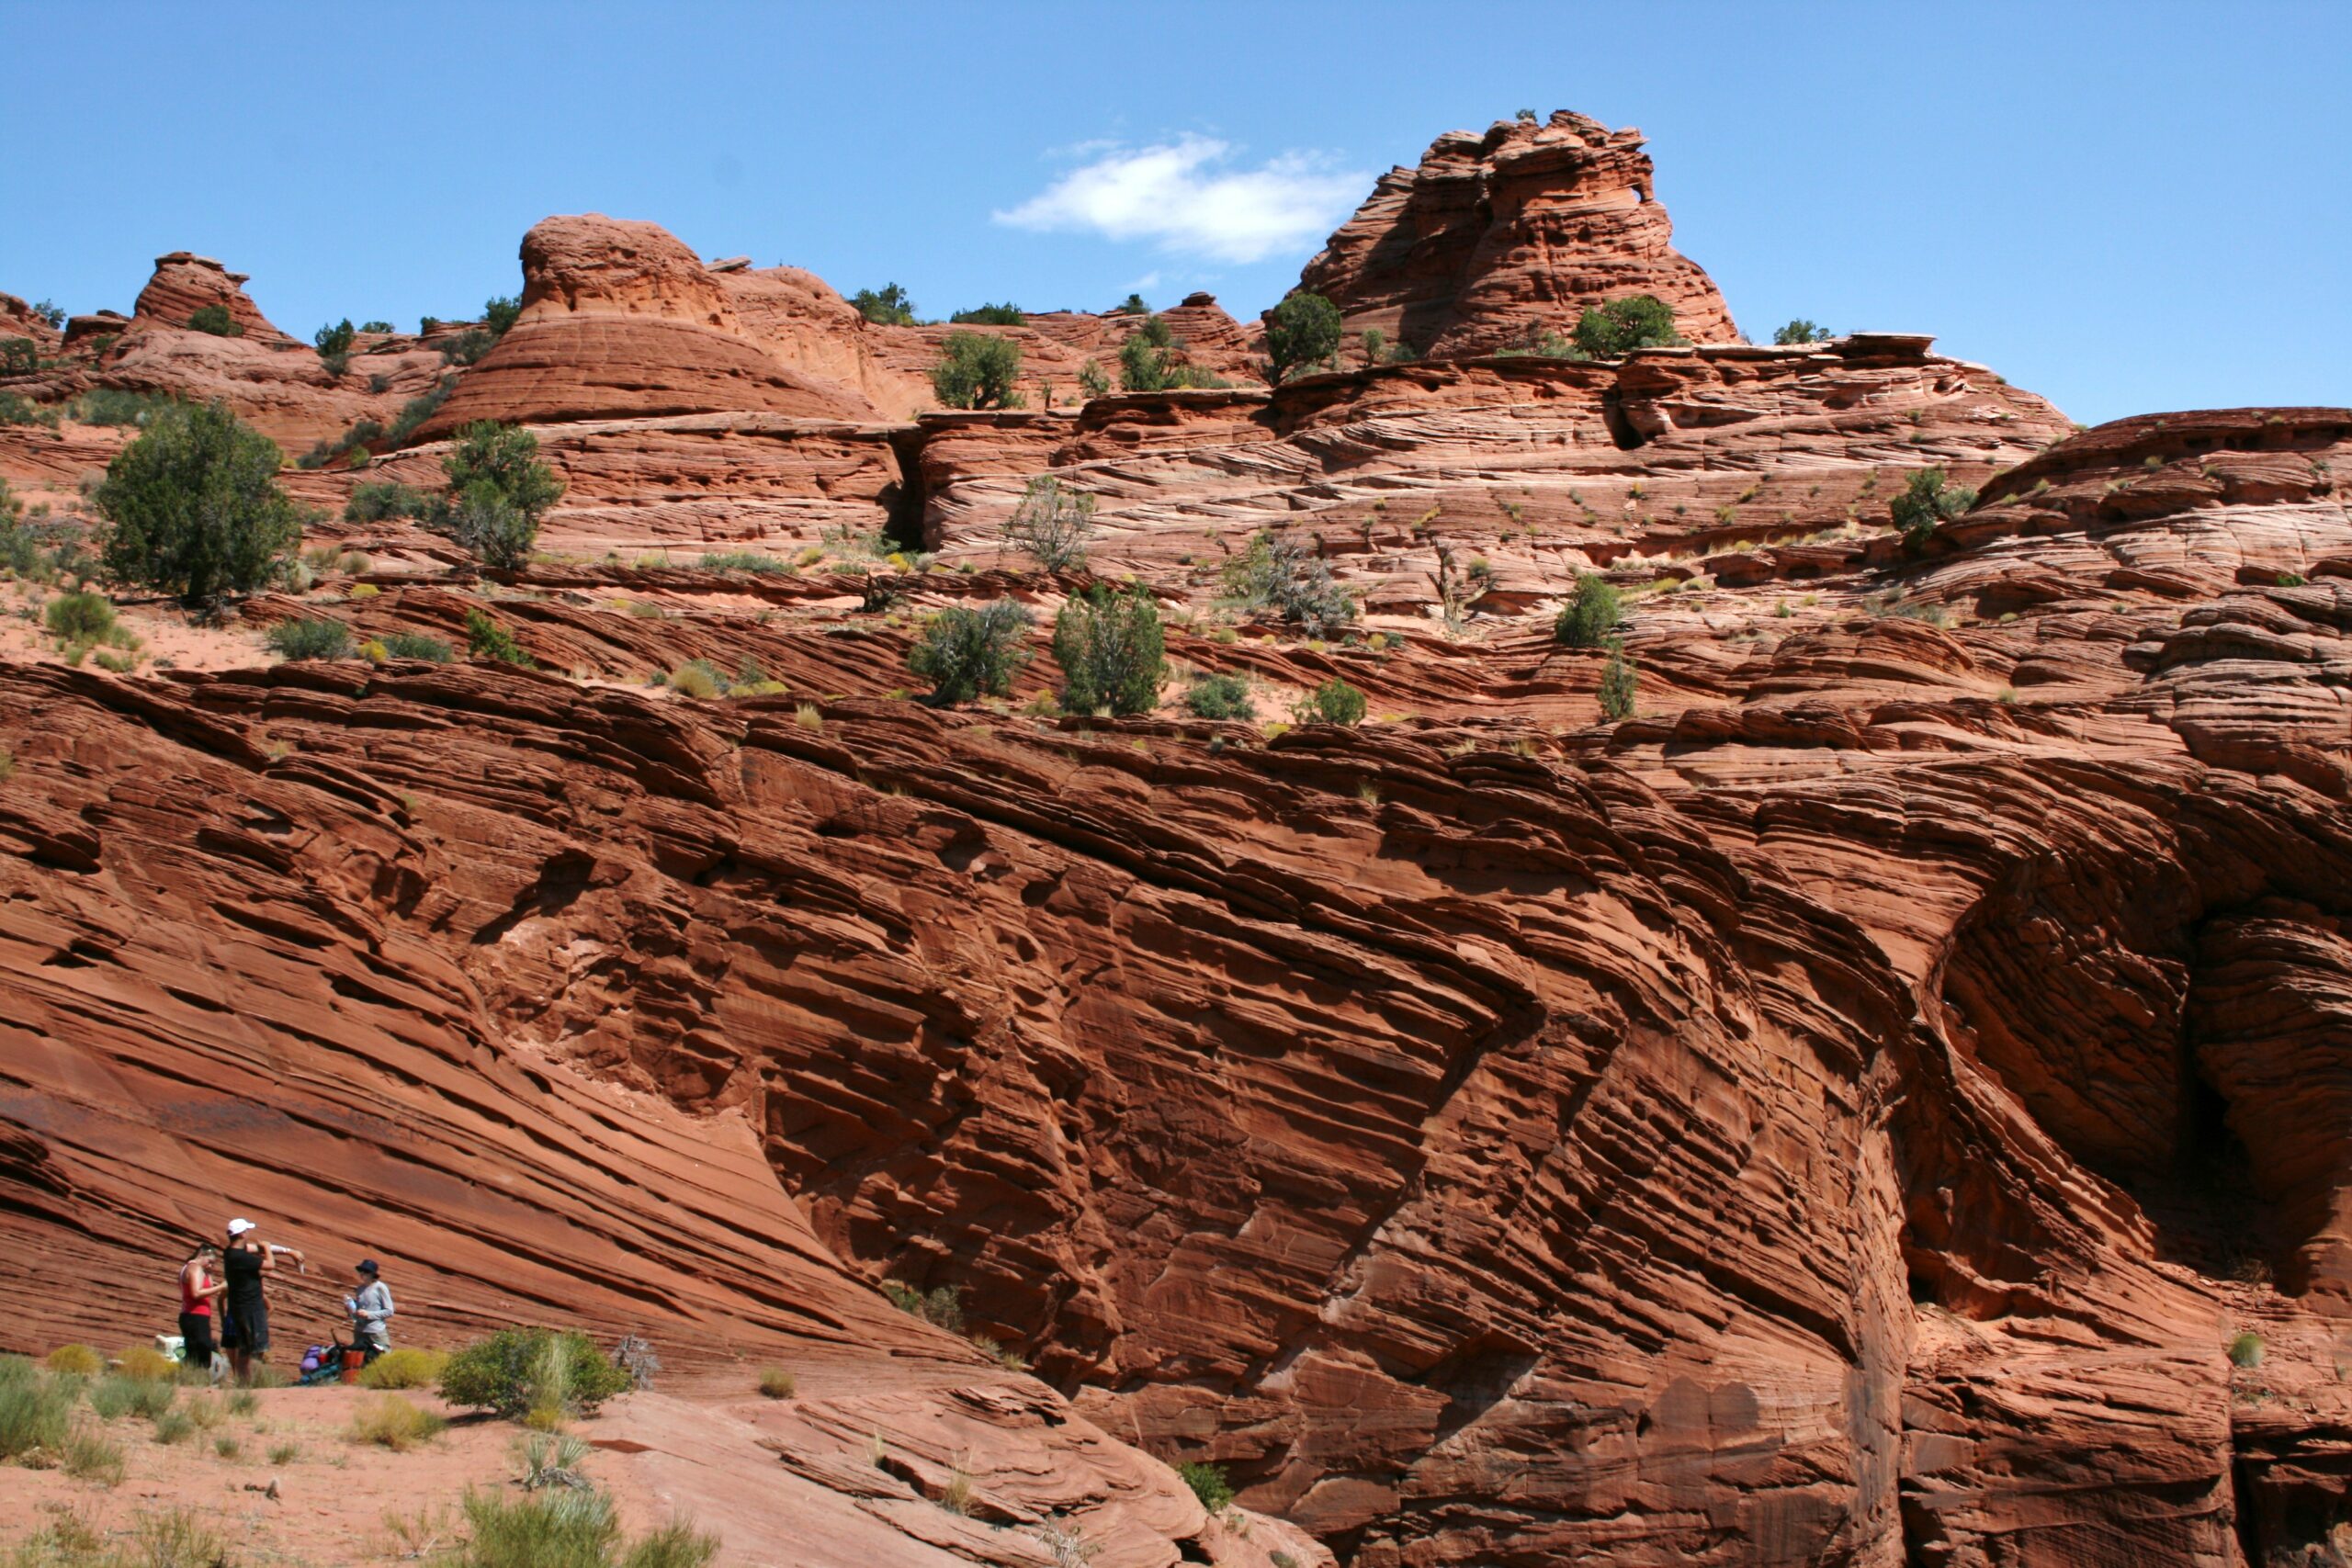 The group rests above Buckskin Gulch after climbing out of the canyon.